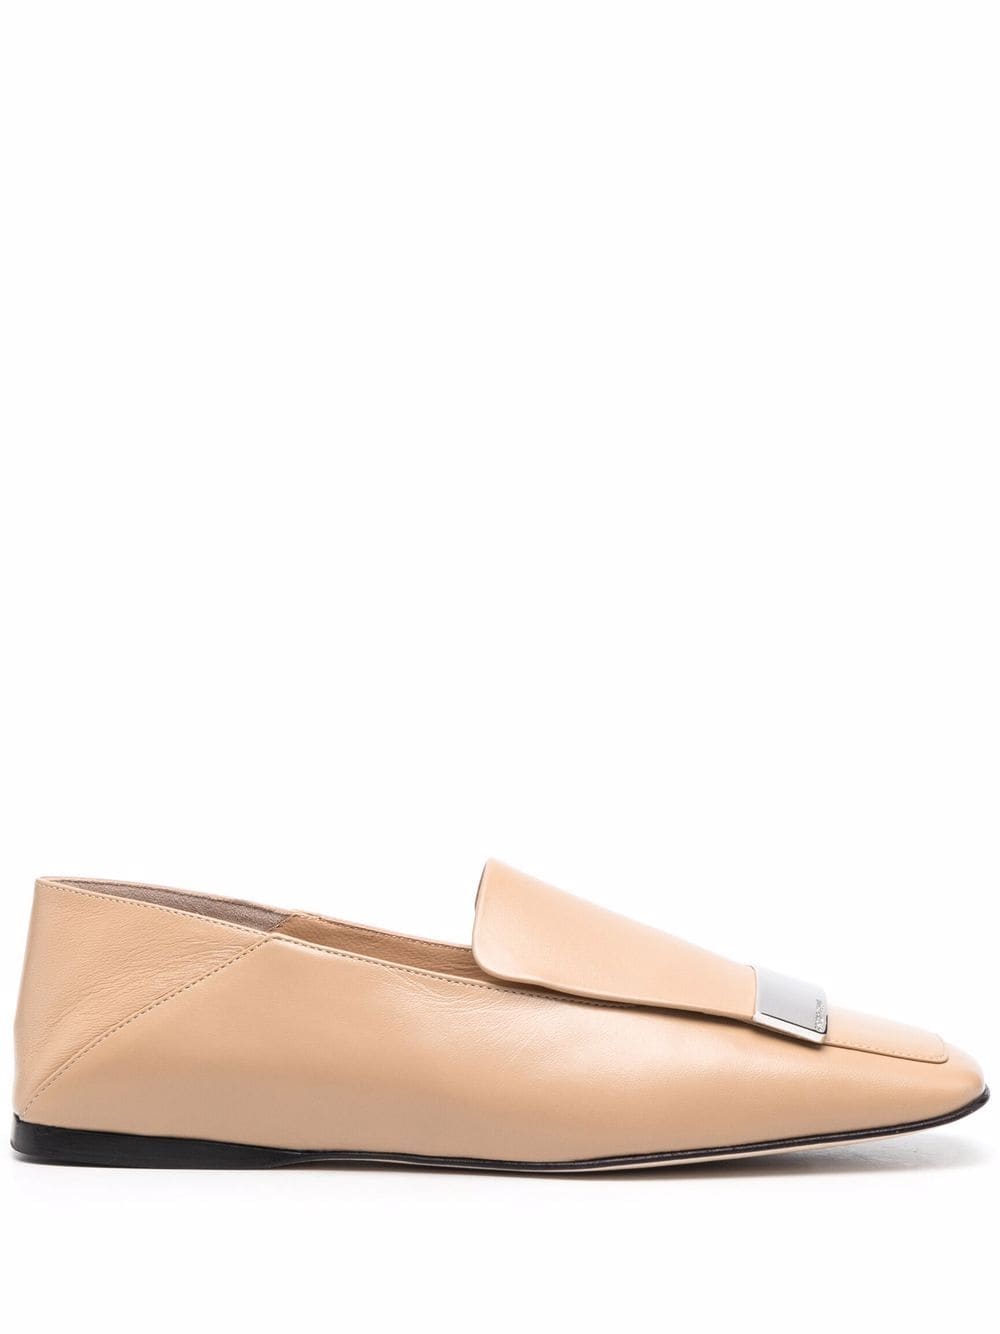 Sergio Rossi logo-plaque Embellished Loafers - Farfetch